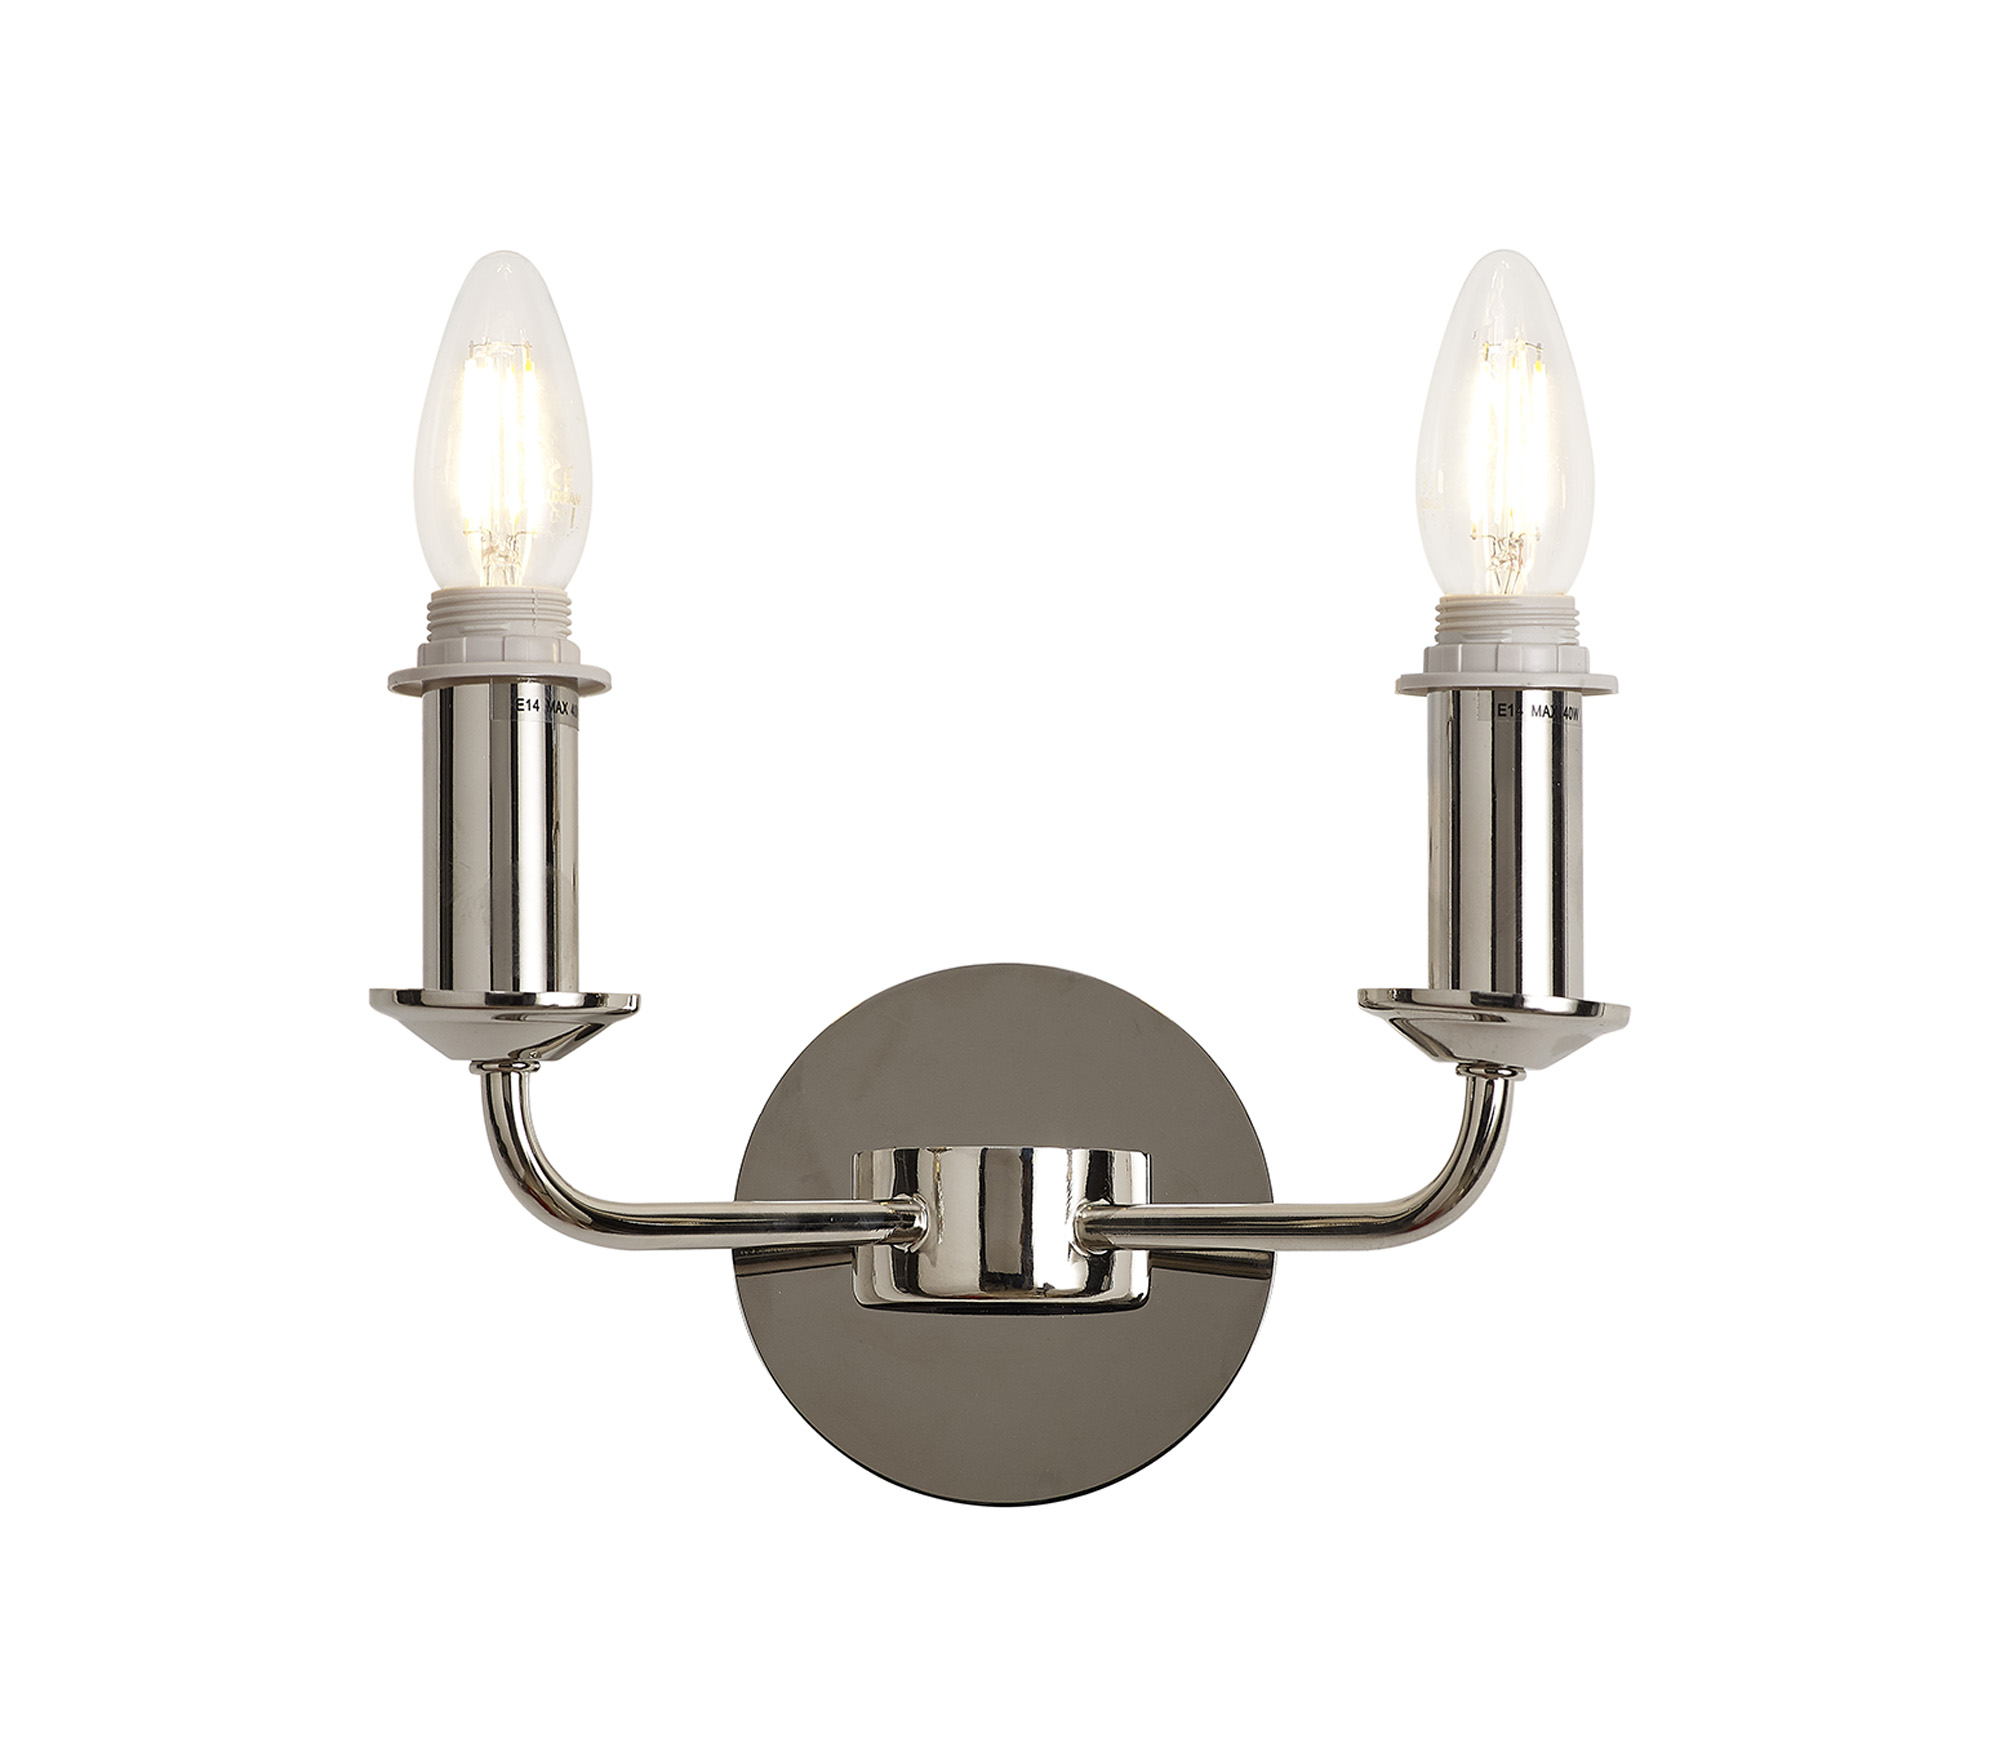 D0680  Banyan Switched Wall Lamp 2 Light Polished Nickel